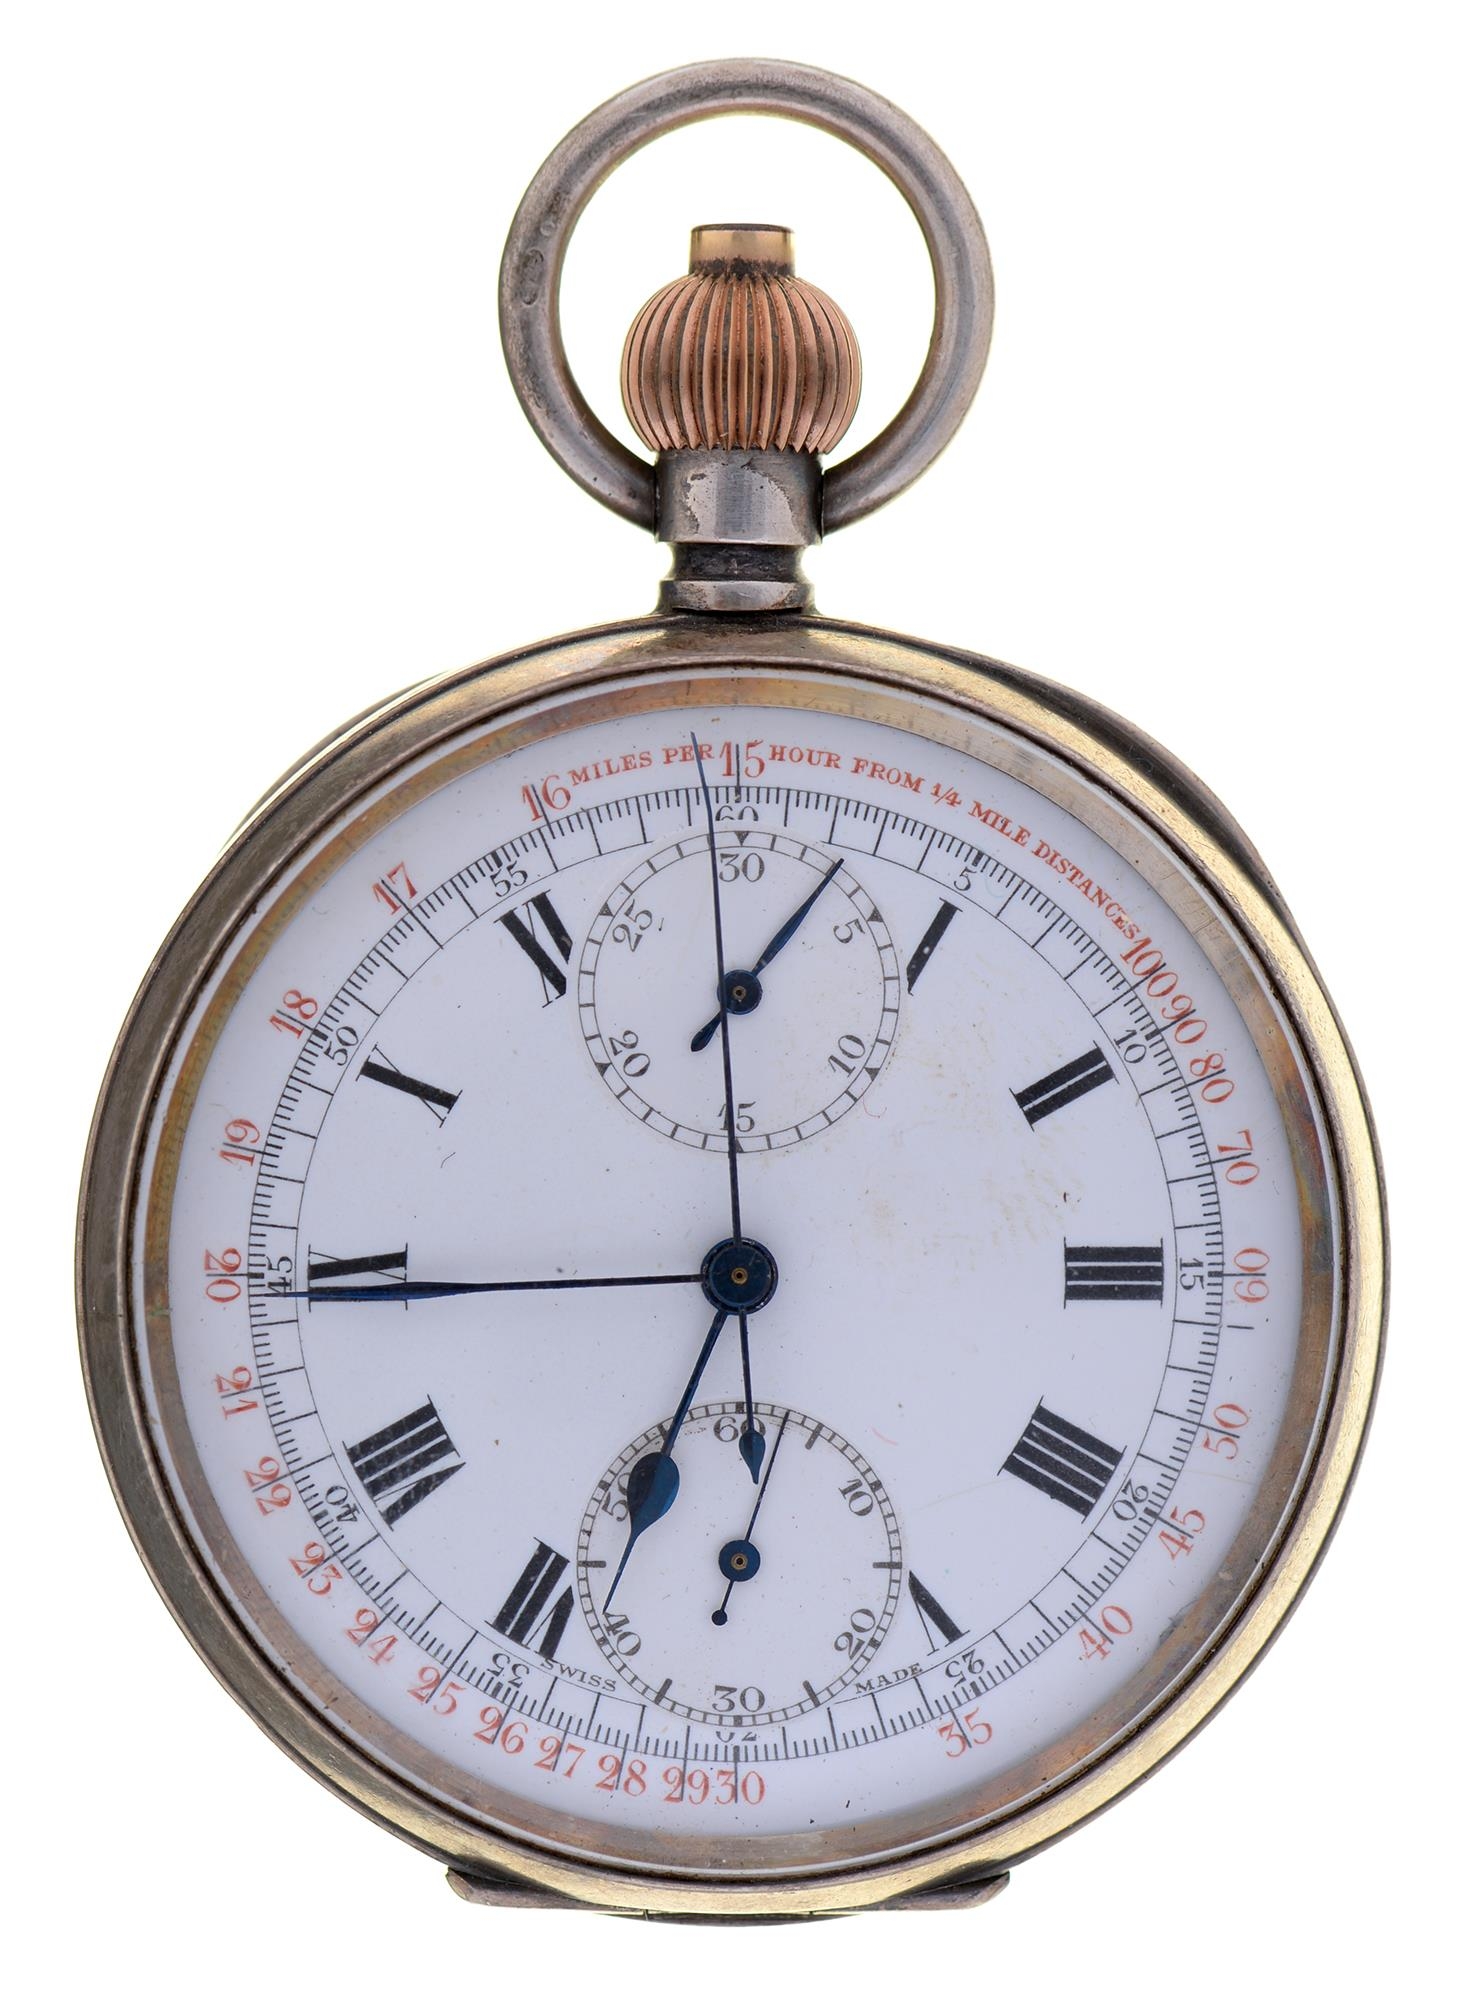 A Swiss silver keyless lever chronograph, the movement marked OFFICIAL and 337/801, enamel dial with